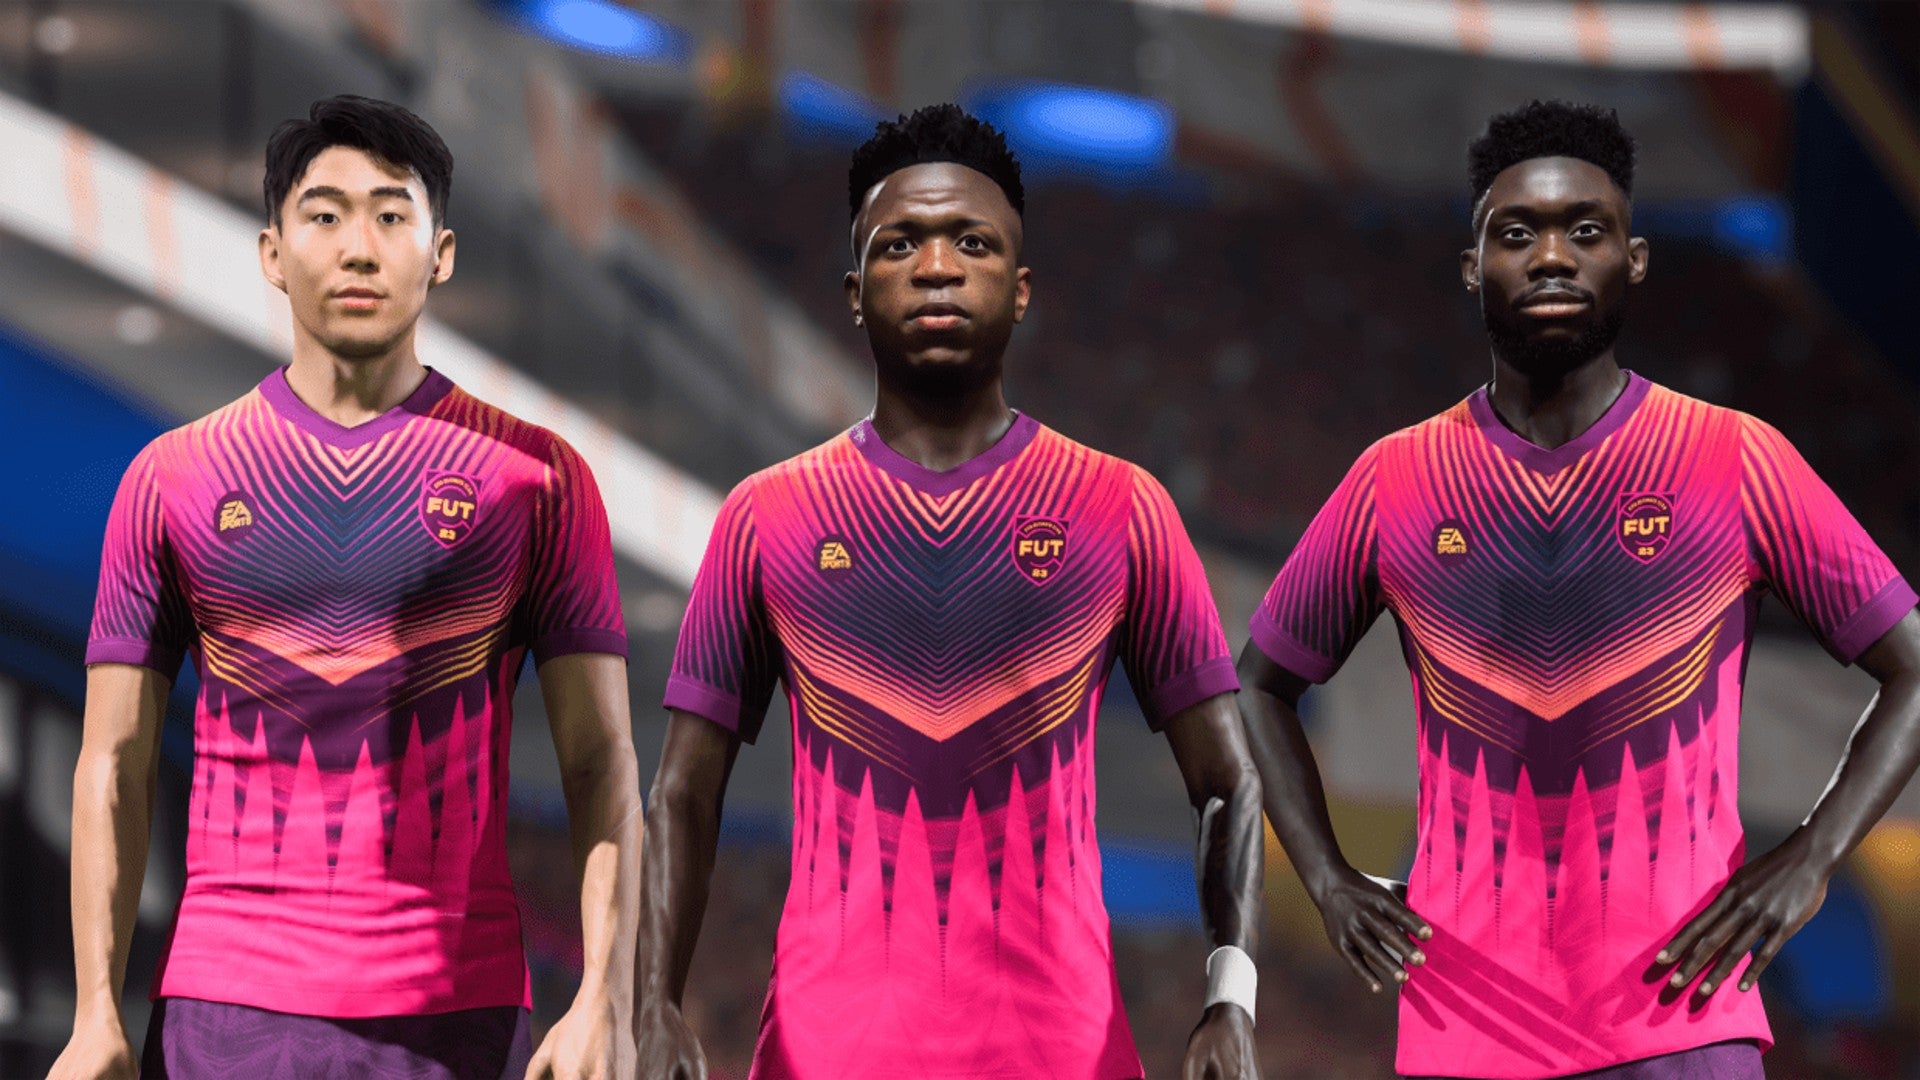 FIFA 23 image showing three players facing forward in a line, wearing vibrant pink Ultimate Team kits, with a blurred stadium behind them.